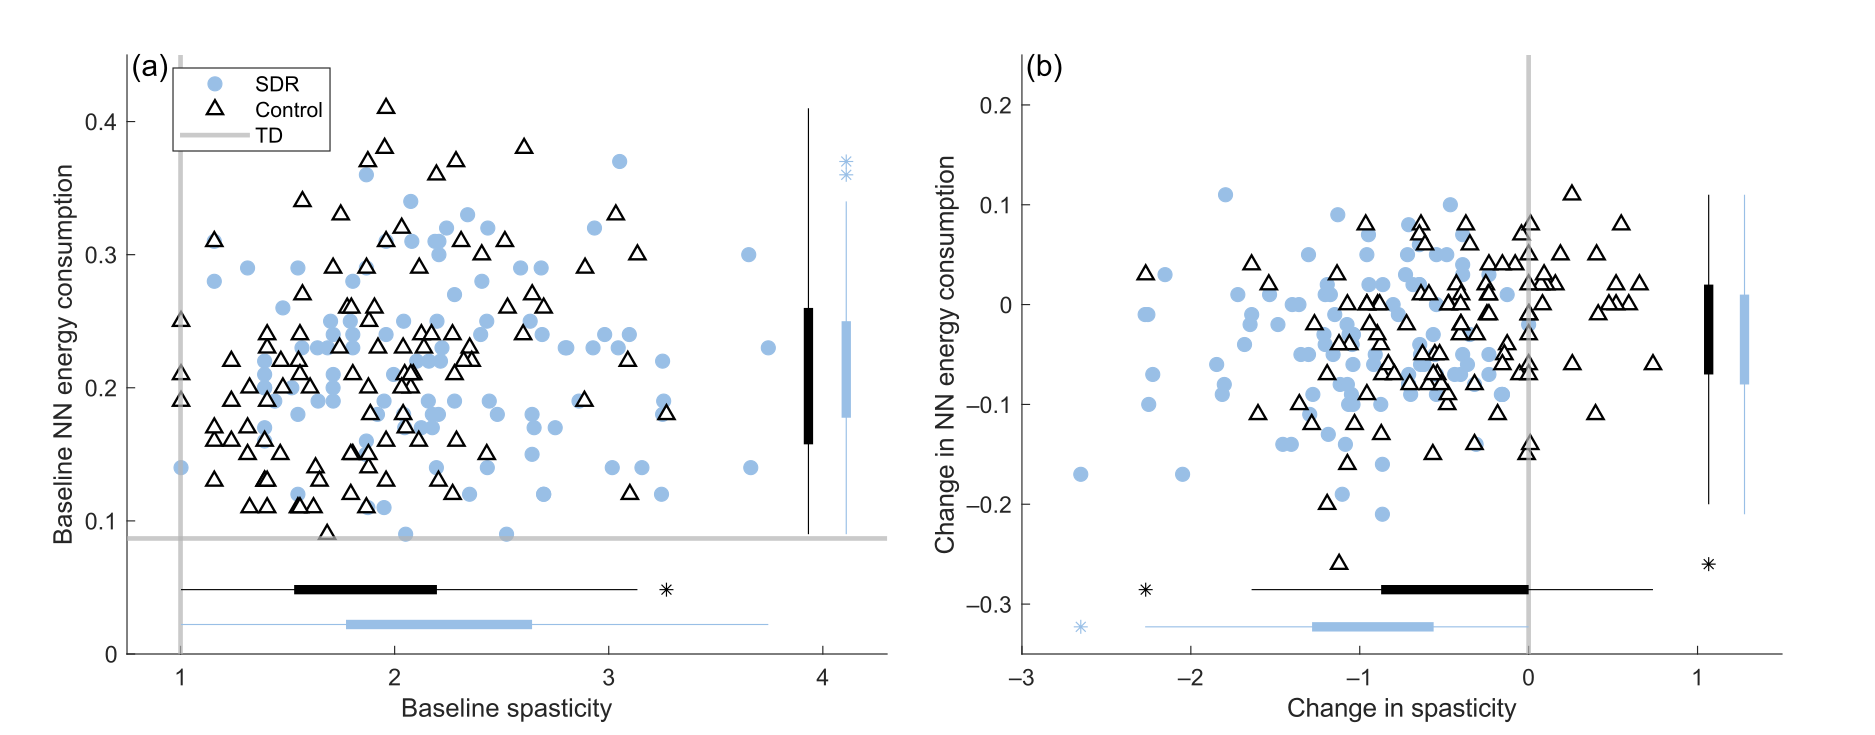 Spasticity and net-nondimensionalized (NN) energy consumption for children with cerebral palsy (CP) who underwent a selective dorsal rhizotomy (SDR) and matched peers with CP who did not undergo SDR (control). (a) Baseline spasticity and NN energy consumption were similar between groups. Gray lines show normative values for typically developing (TD) peers from Gillette Children’s Specialty Healthcare. (b) Spasticity and NN energy consumption decreased significantly at follow-up for both groups. The SDR cohort had a significantly greater decrease in spasticity compared to the no-SDR group, but a similar decrease in NN energy consumption. Bars represent distributions for each group including outliers (*).